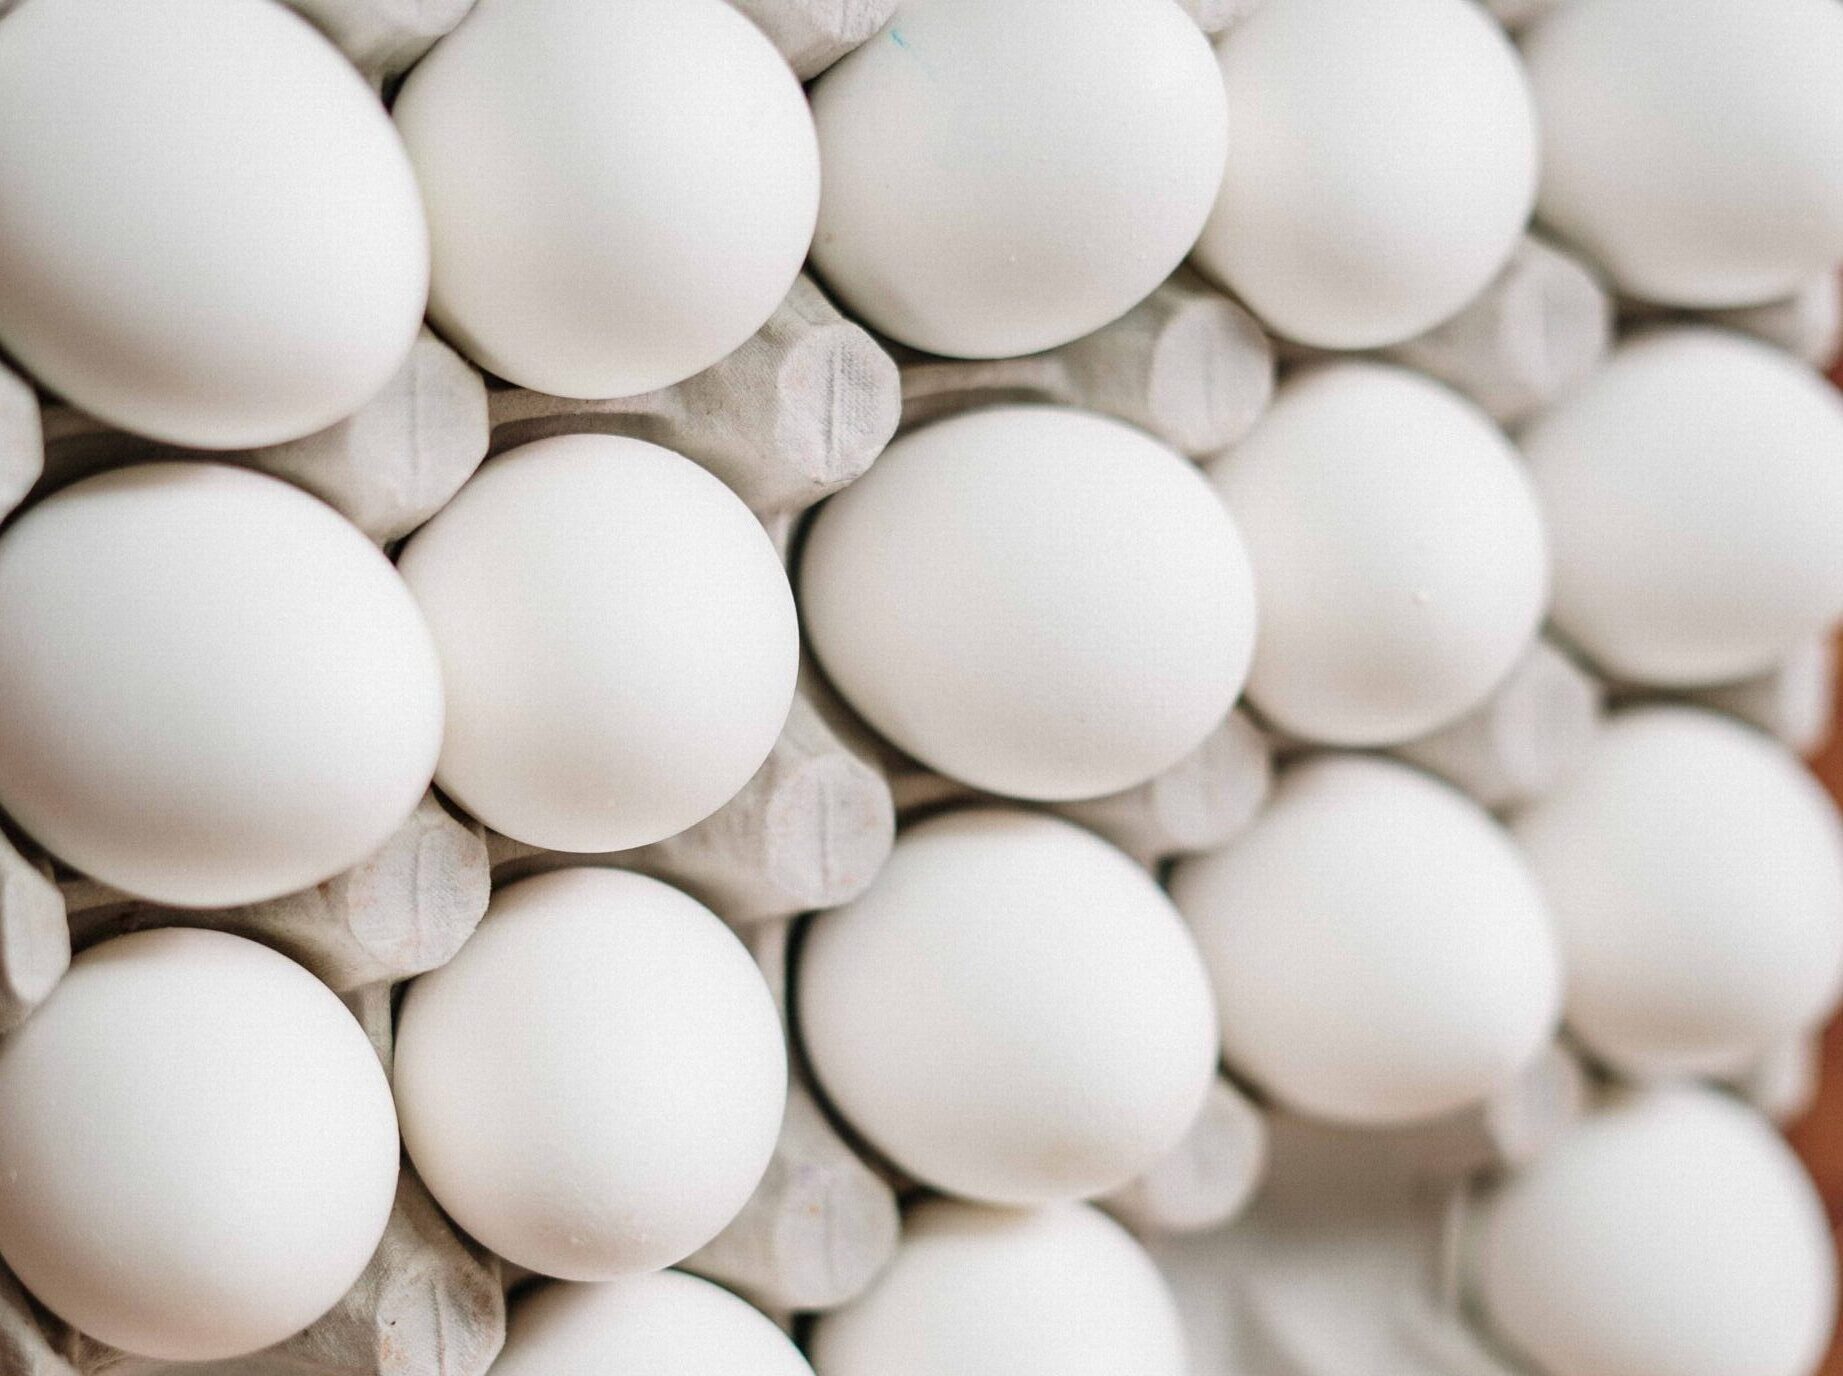 Record Egg Prices Driven by Supply Disruptions